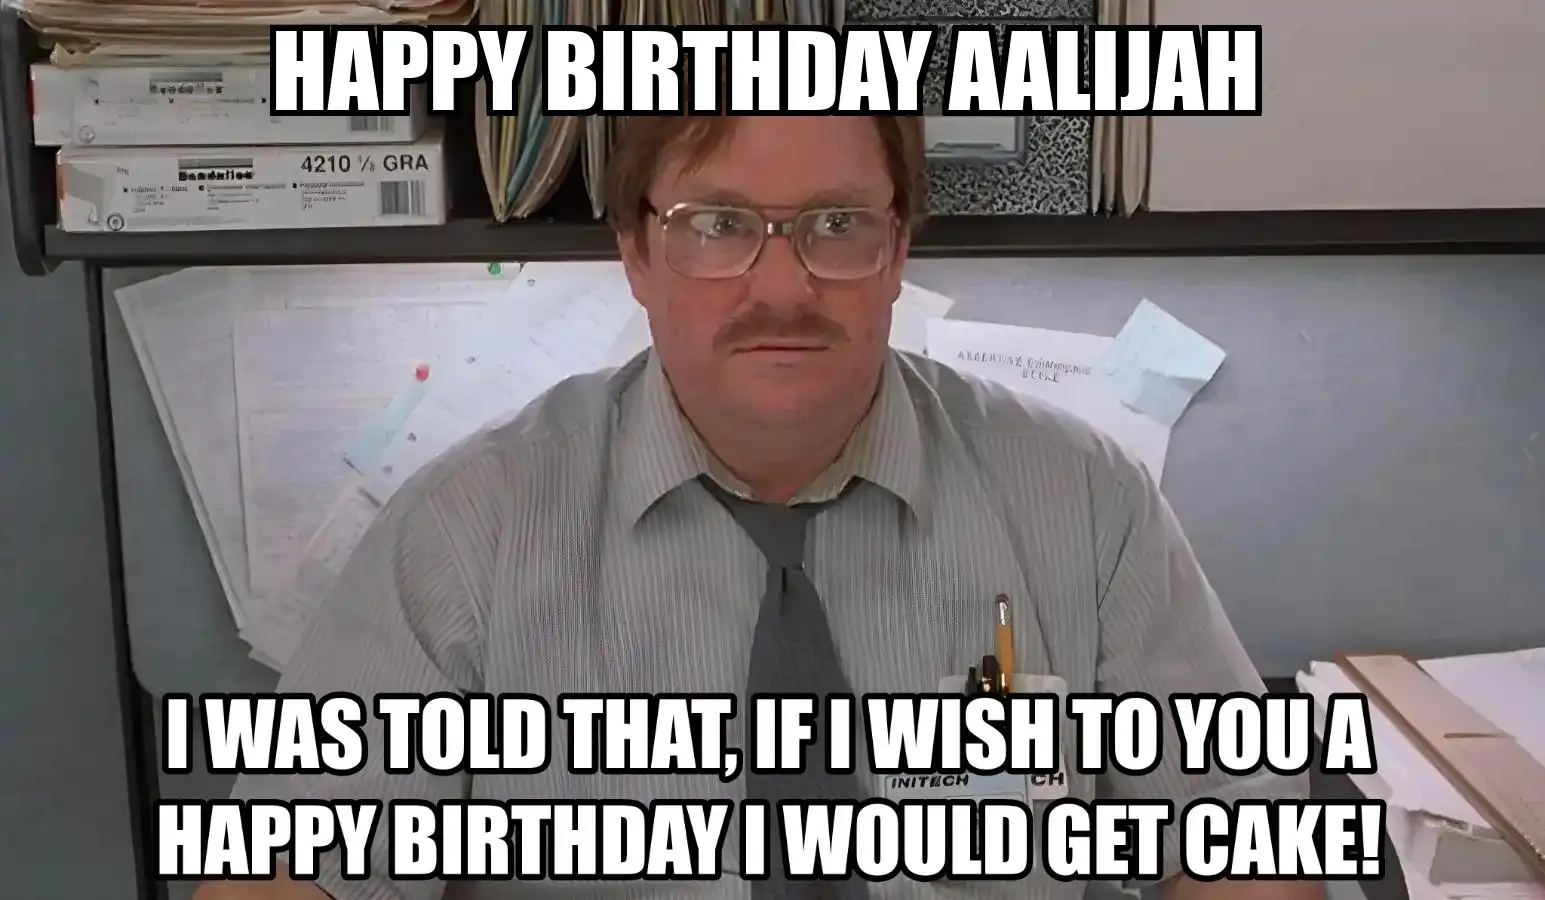 Happy Birthday Aalijah I Would Get A Cake Meme